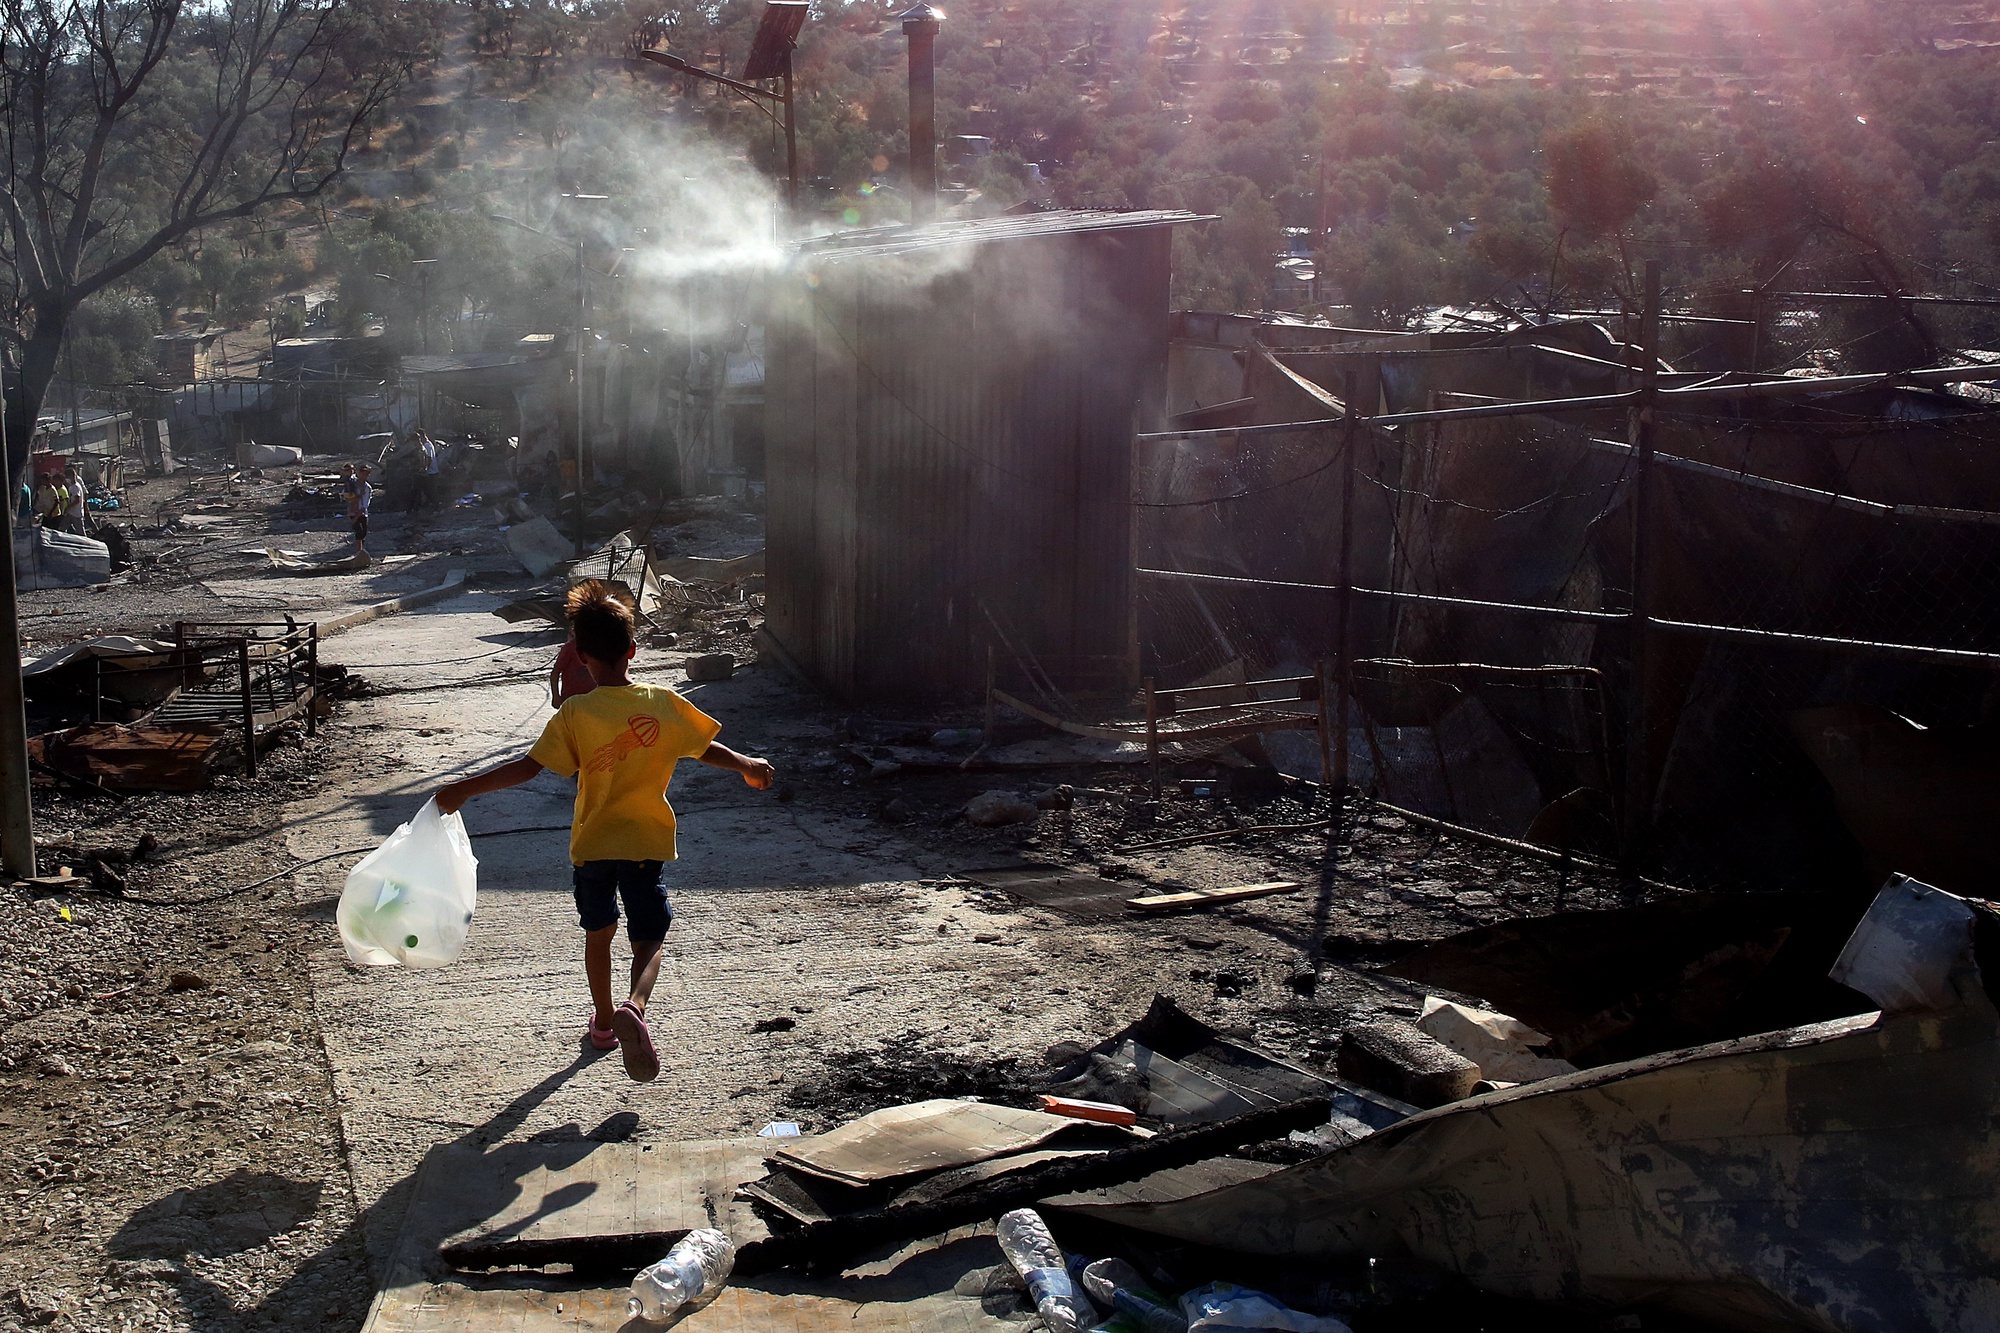 epa08656982 A child walks among debris in the Moria refugees camp on the island of Lesbos, Greece, 09 September 2020. According to reports, a fire broke out at Moria Camp early on 09 September, after approximately 35 refugees, who had tested positive for COVID-19, refused to move into isolation with their families.  EPA/ORESTIS PANAGIOTOU